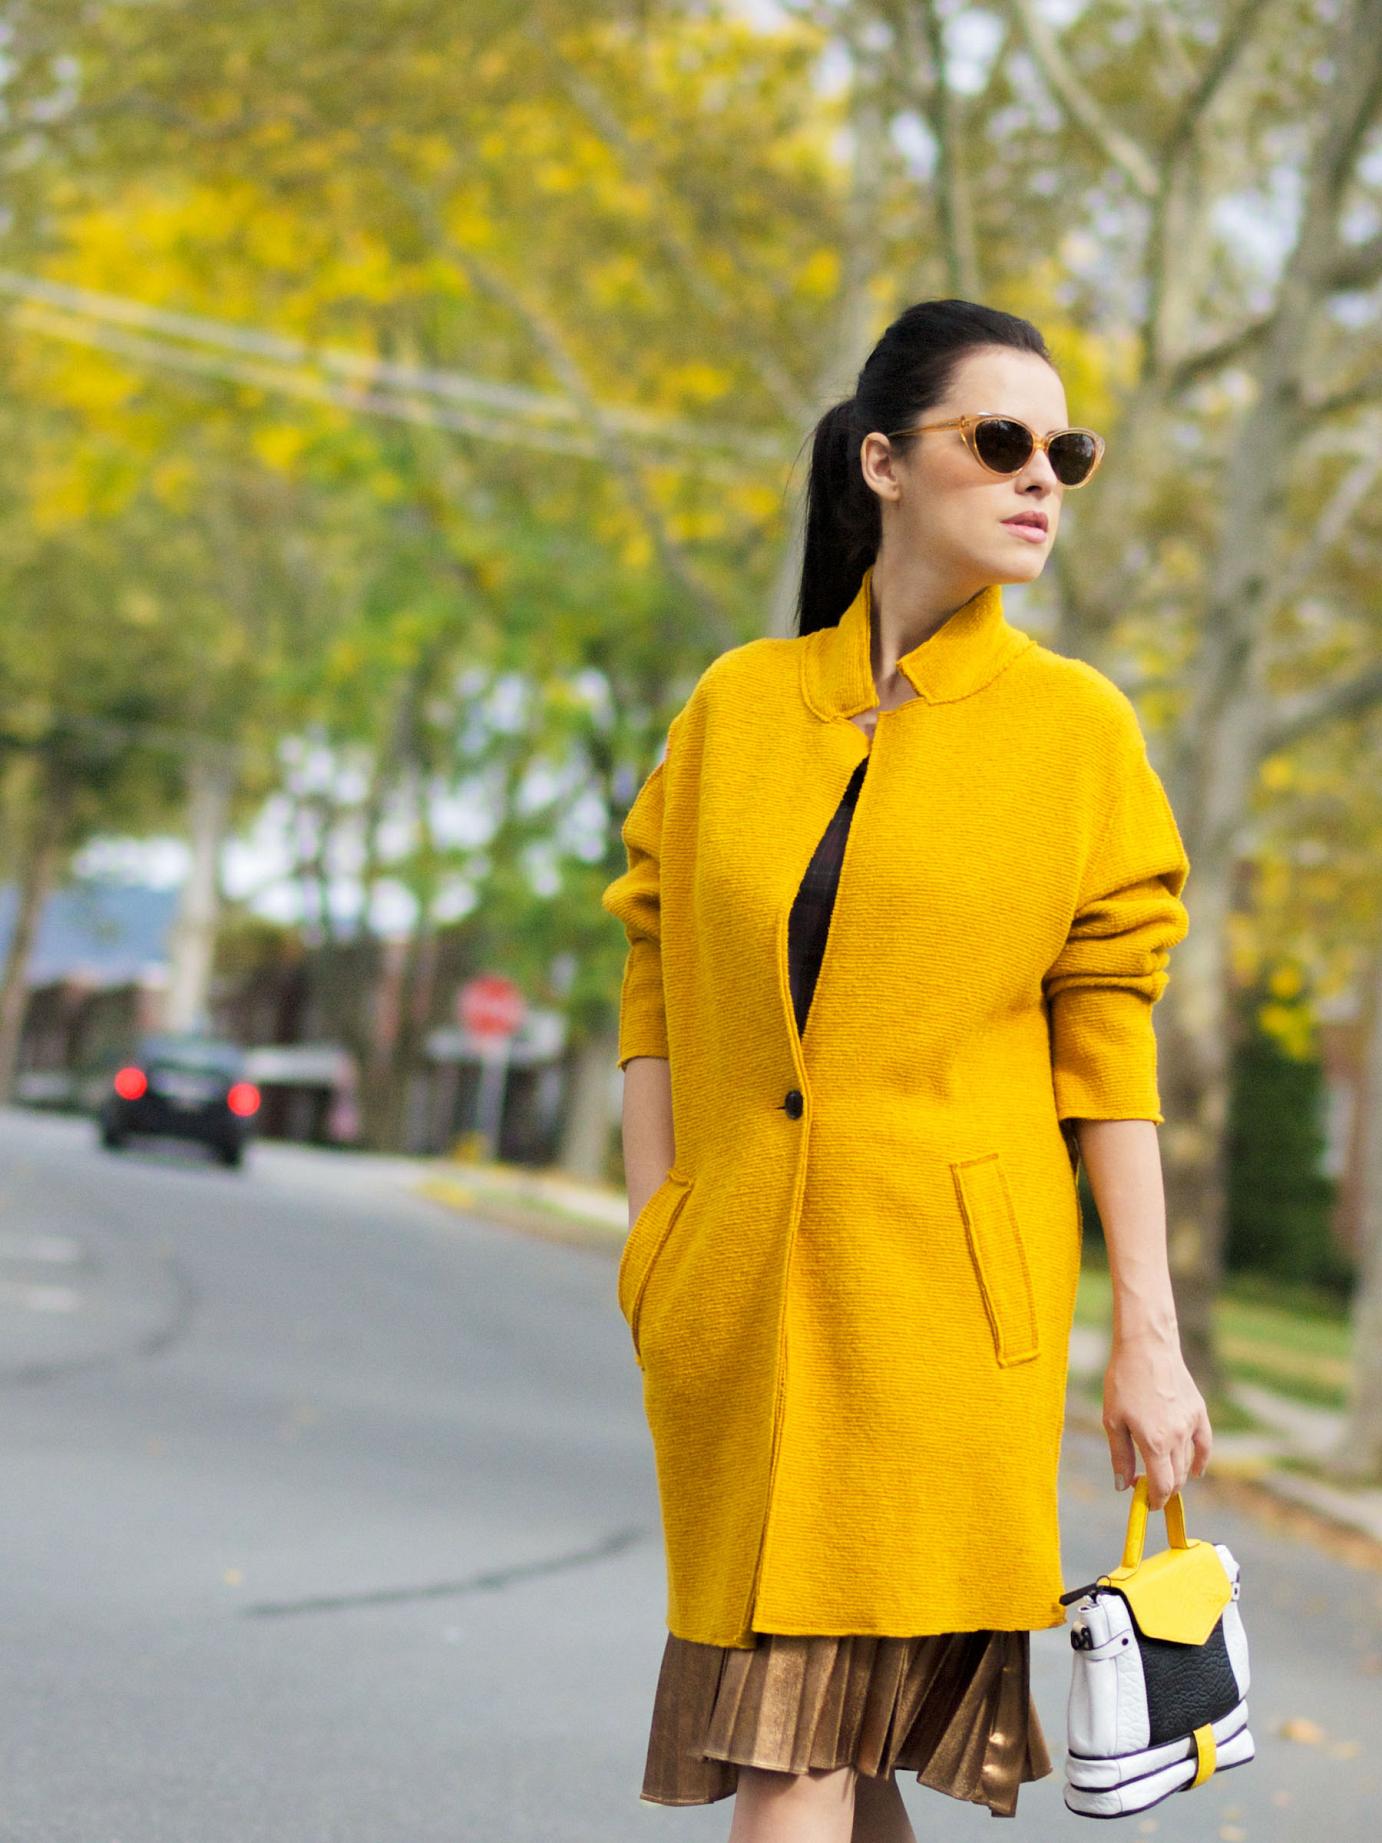 bittersweet colours, fall, fall coats, fall colors, fall trends, yellow coat, facine, pierre hardy shoes, metallic skirt, pleated skirt, metallic trends, eye cat sunglasses, maternity style, 18 weeks, street style, 